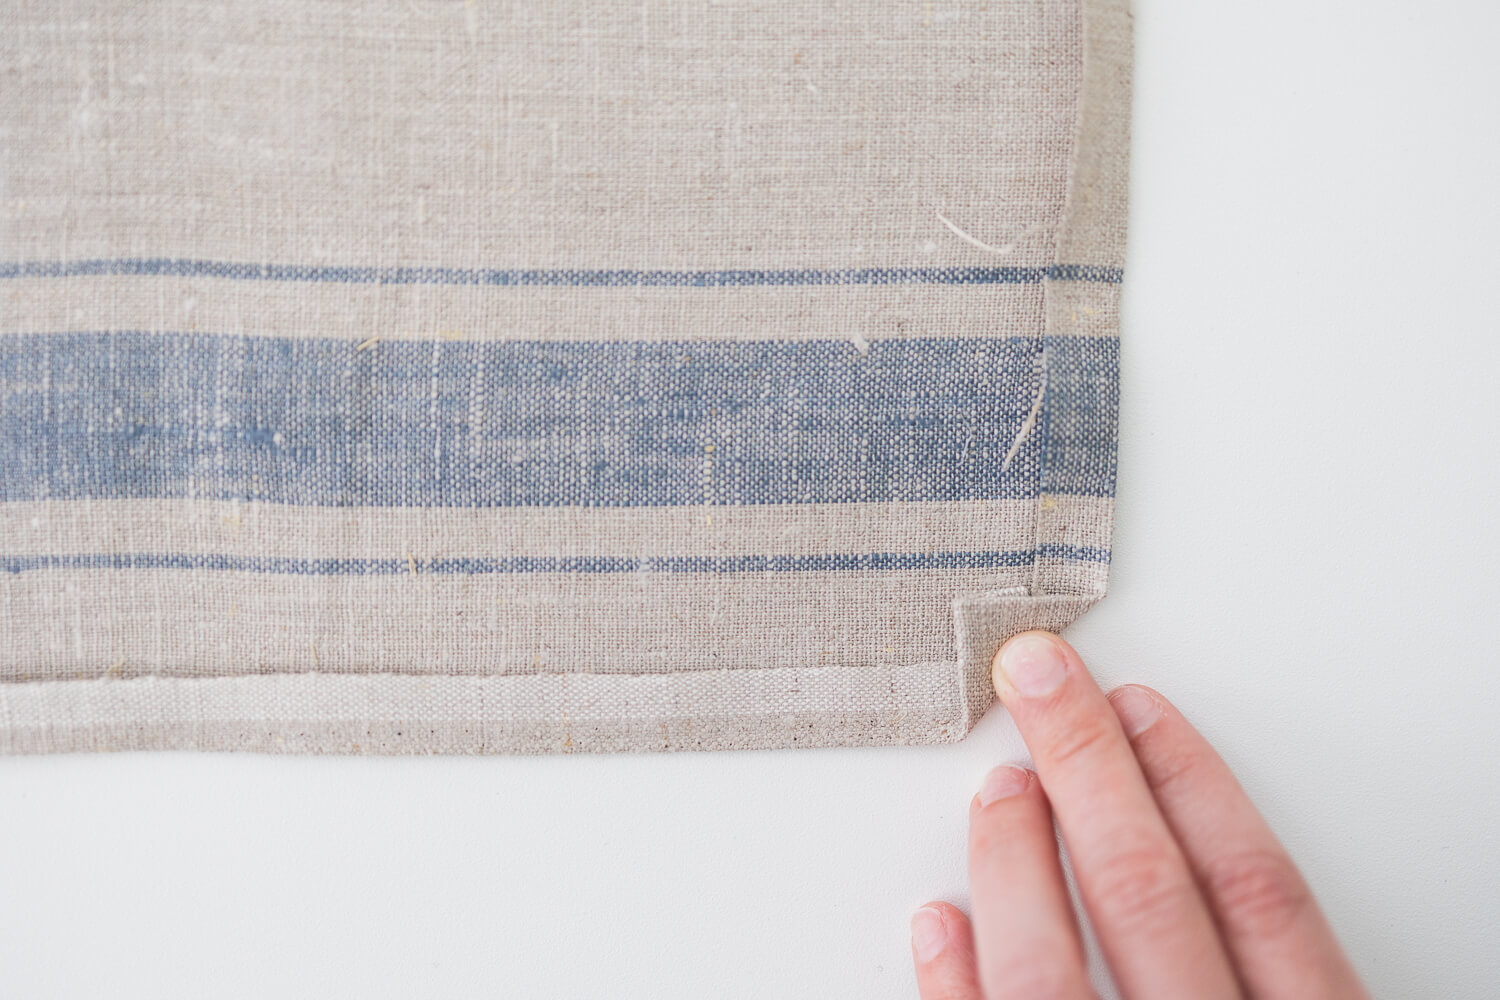 Tutorial: How to Care For Your Tea Towels – the thread